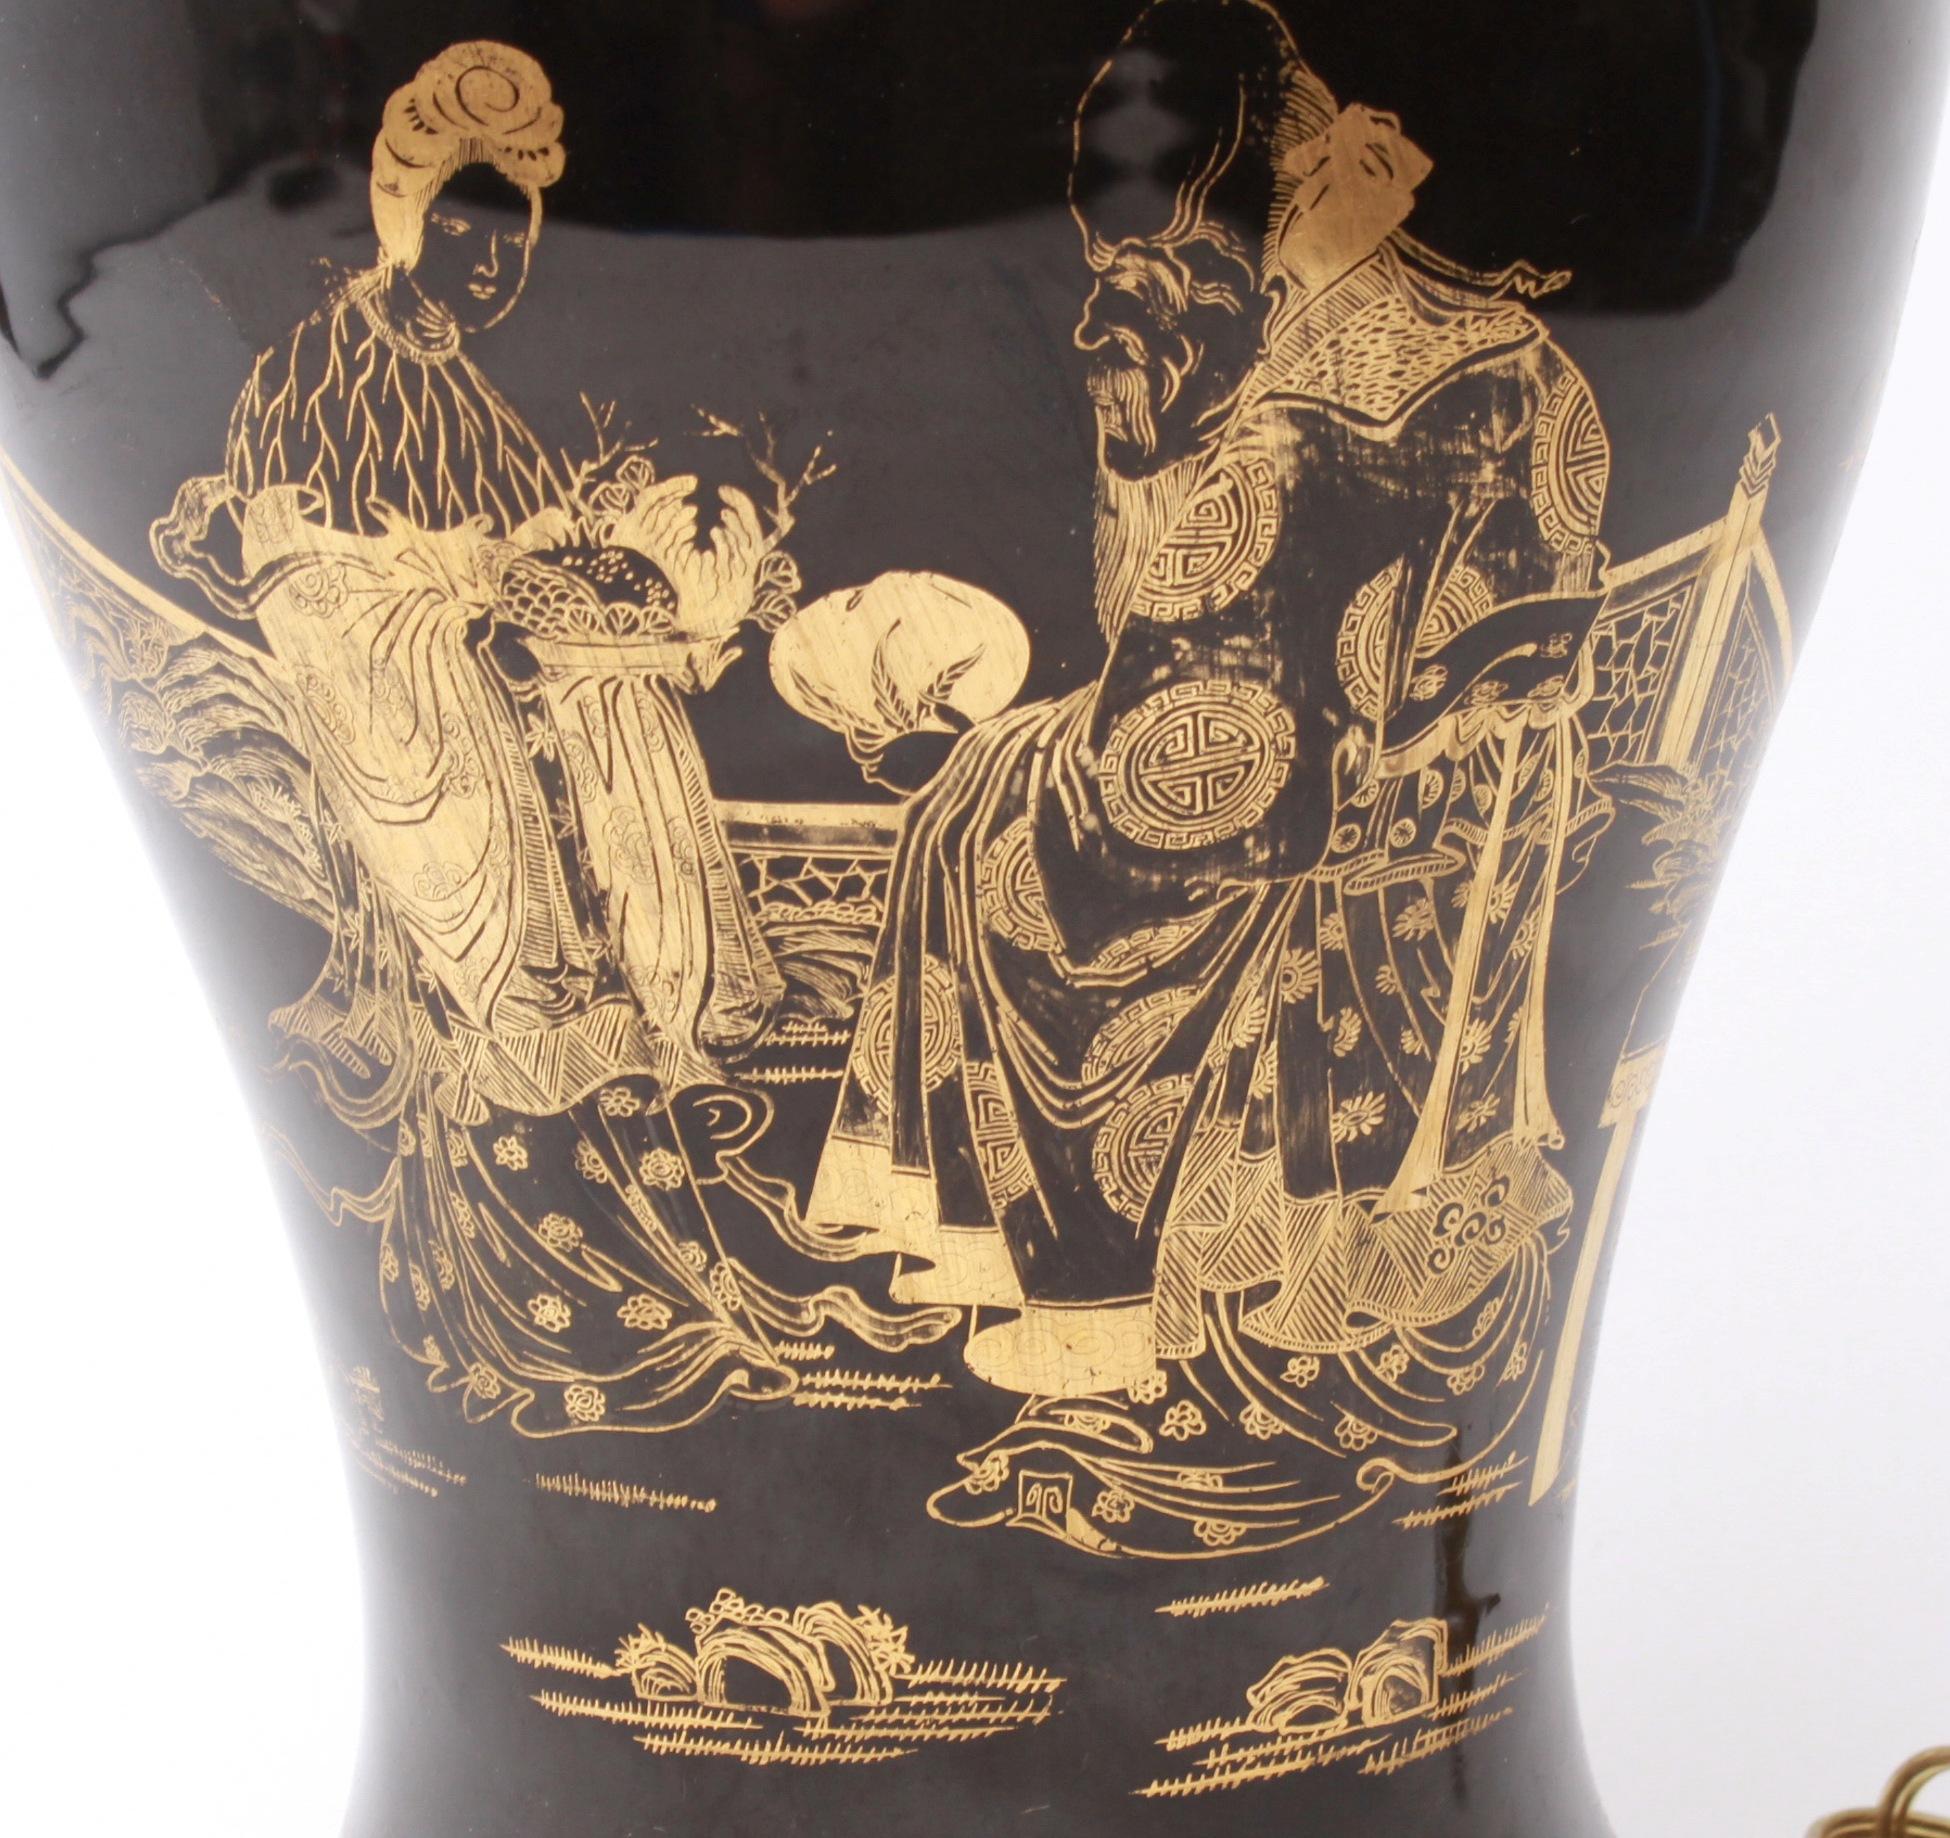 Chinese porcelain vase mounted as a table lamp, with a black glaze with gilt decorations, depicting figural scenes on both sides. In great vintage condition with a minor hairline in the rim.